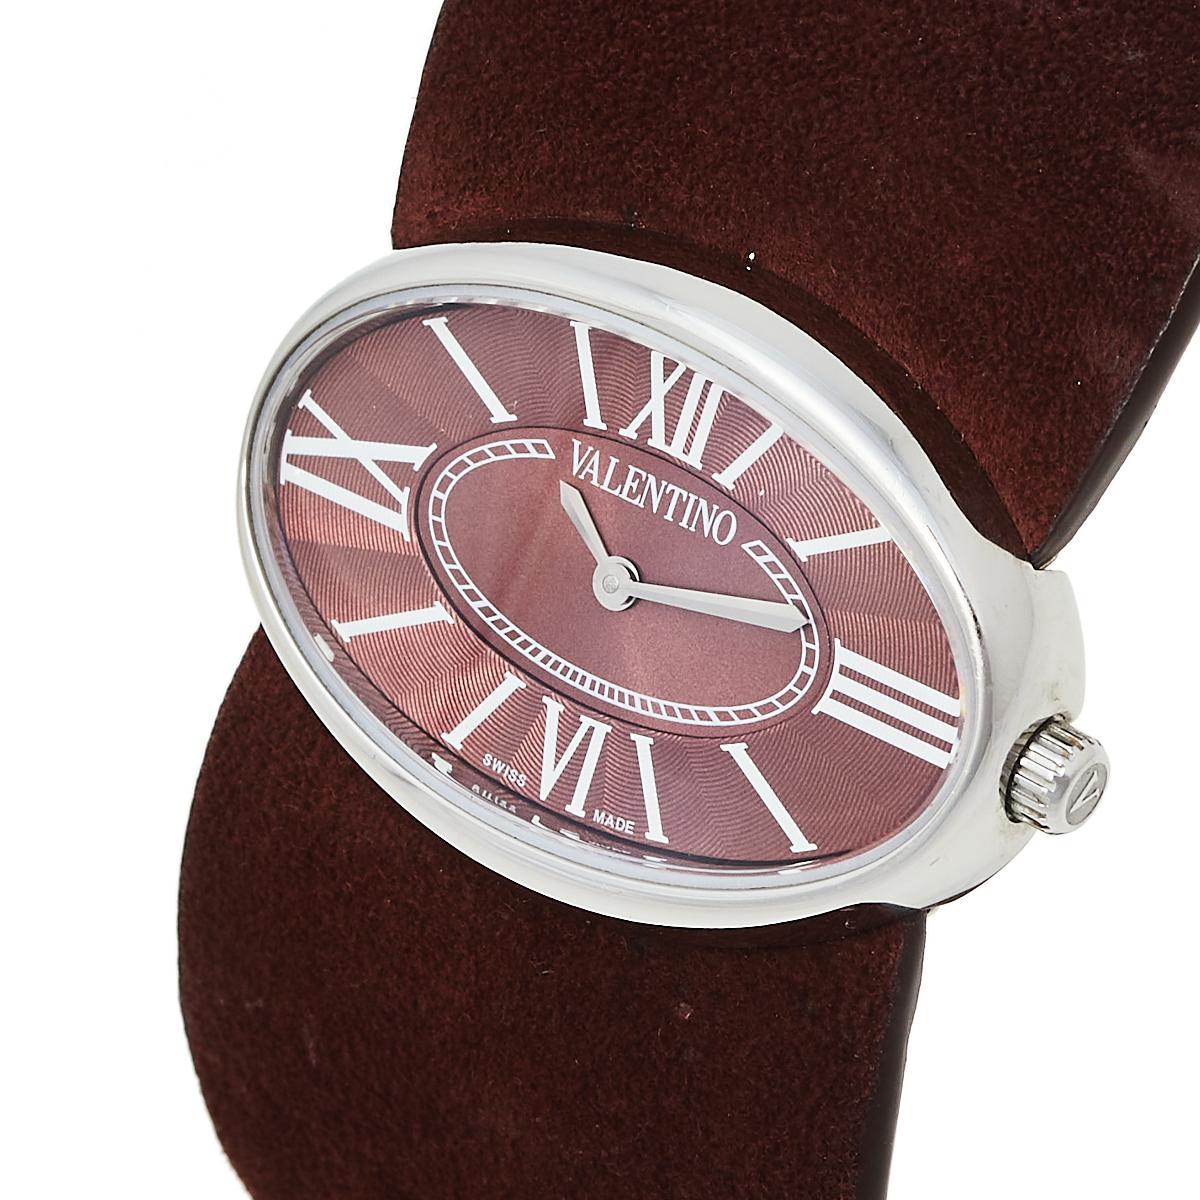 Crafted using stainless steel, this watch by Valentino exhibits the brand’s timelessness and elegance in every little detail of the stunning watch. The oval-shaped case and the burgundy leather bracelet look very chic and modern. The stylish design